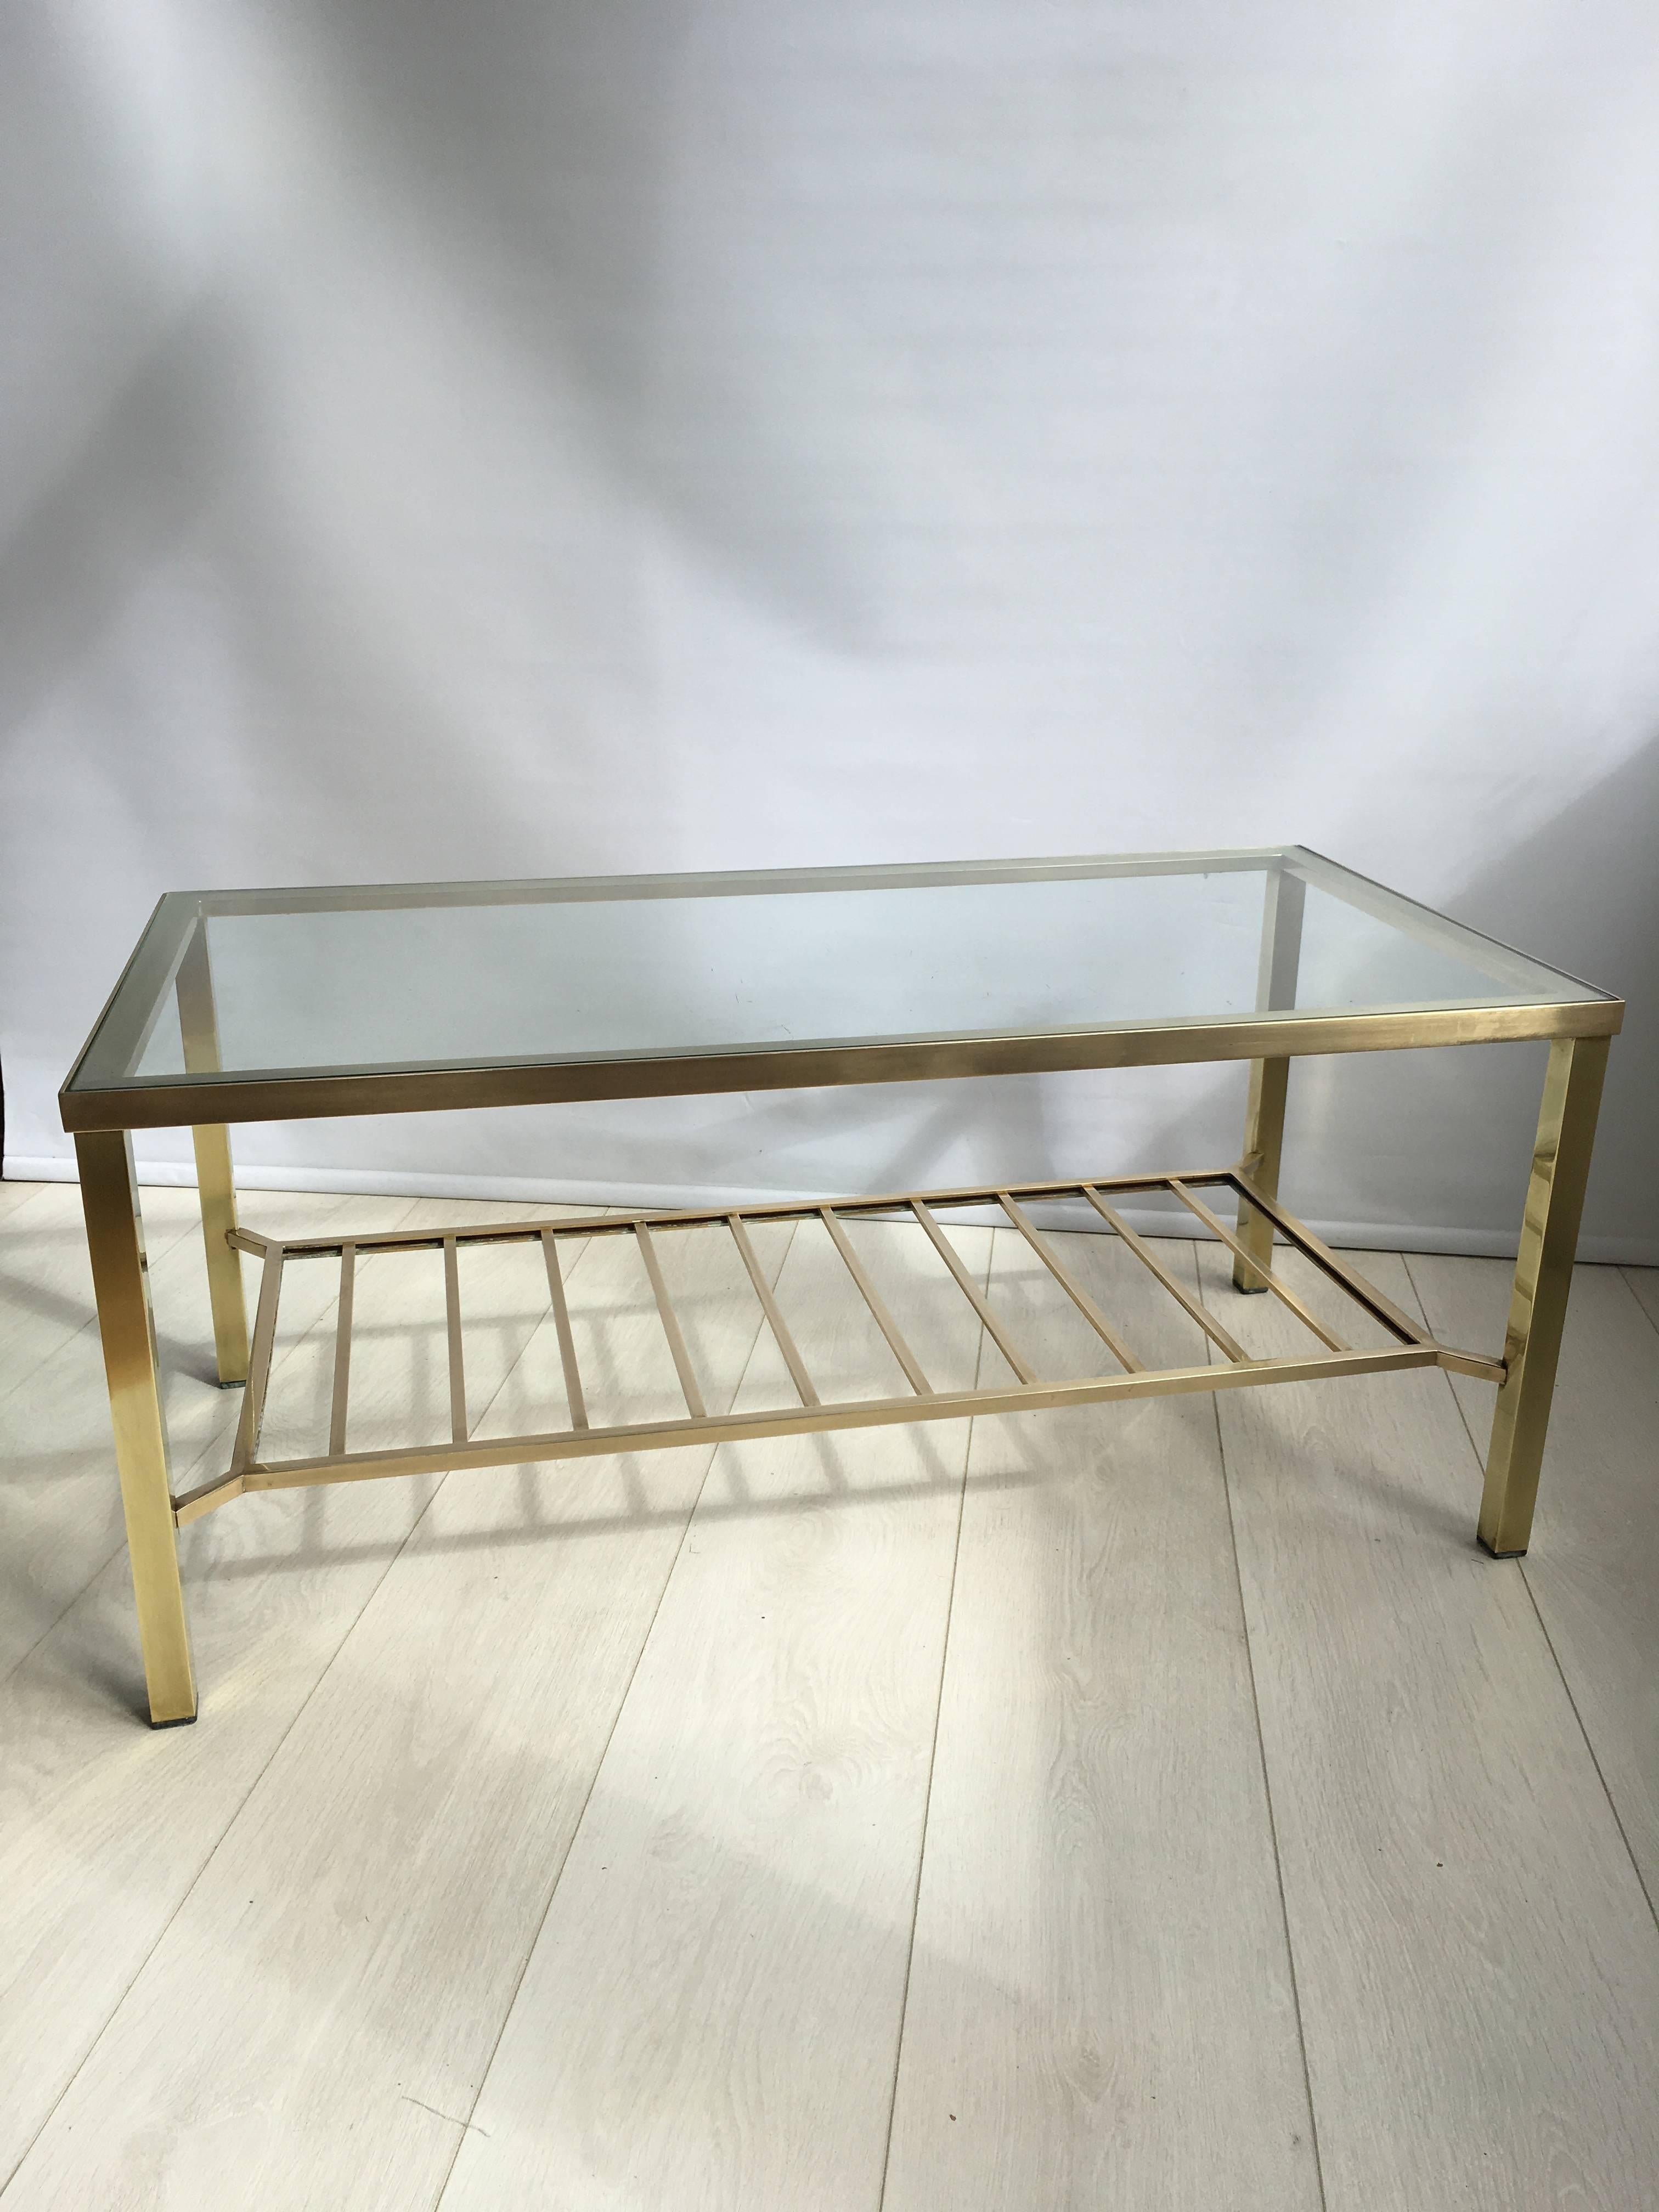 Polished brass coffee table with useful shelf underneath, circa 1970

Measuring 92cm wide, 46.5cm deep and 40.5cm tall.